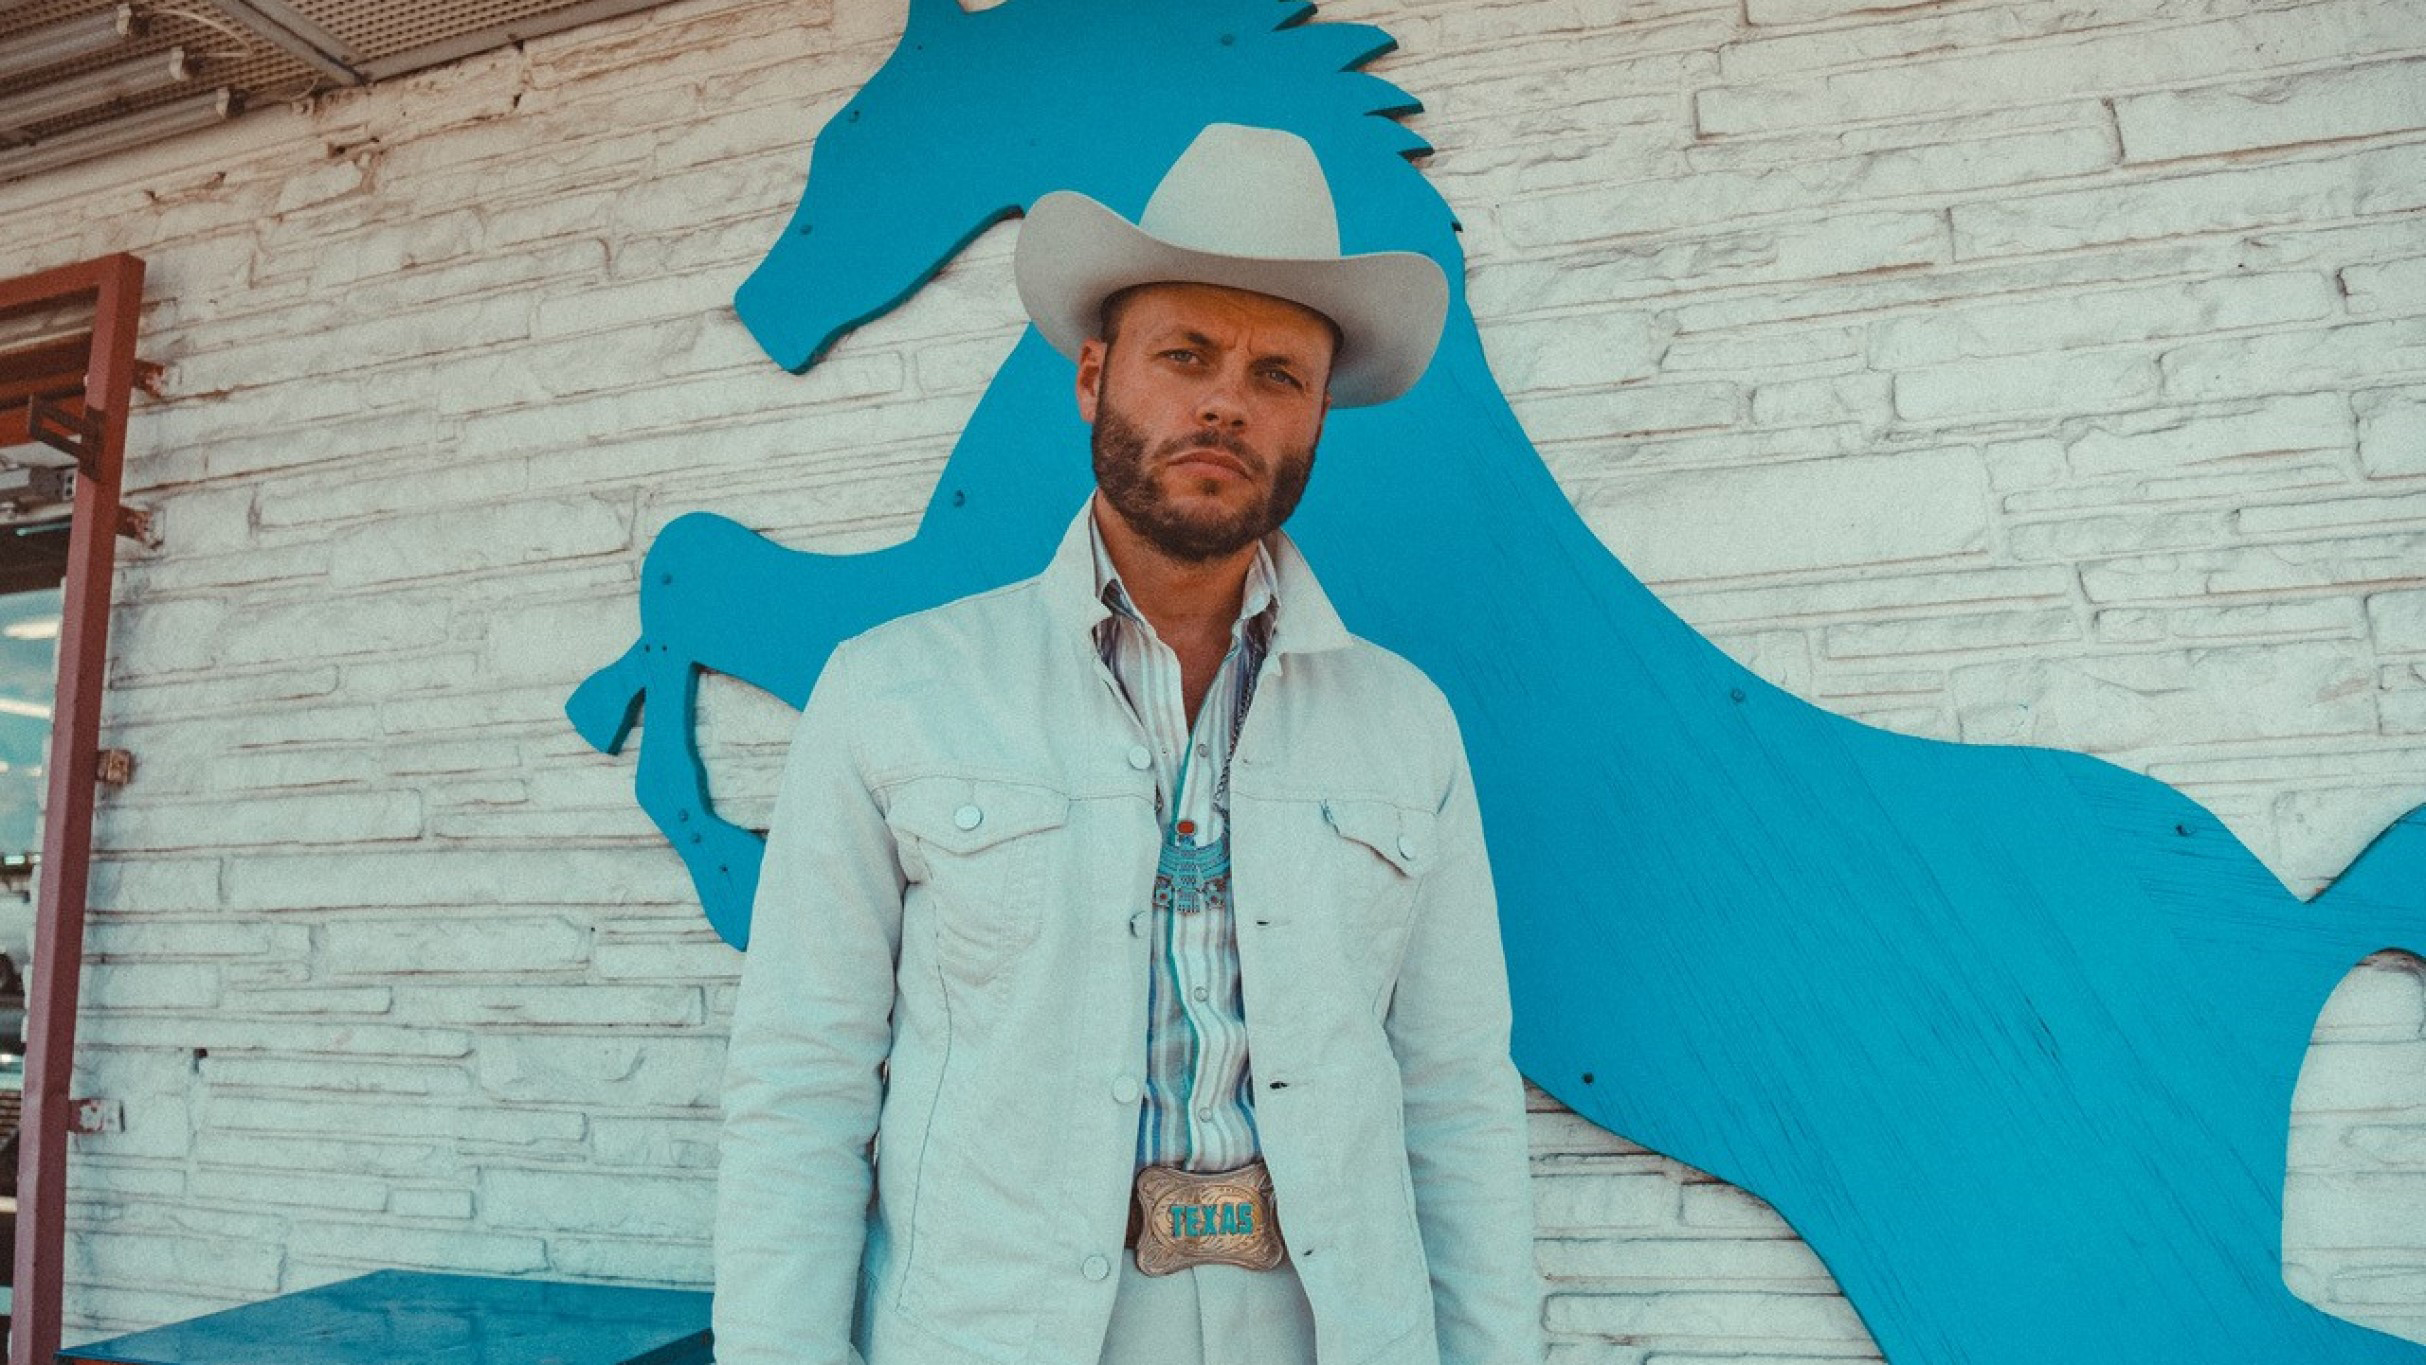 SOLD OUT - Charley Crockett: $10 Cowboy Tour